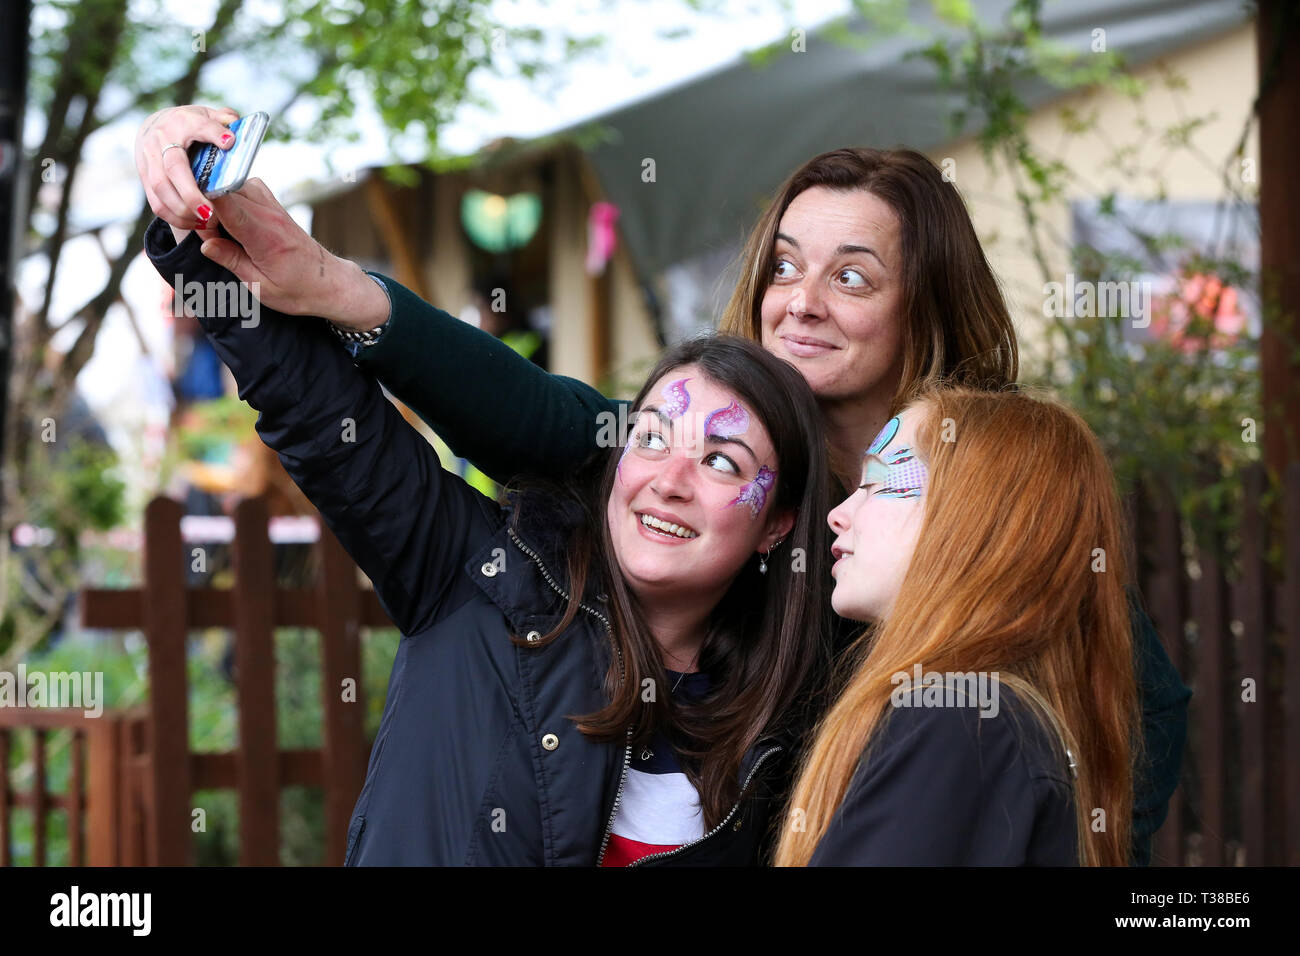 London, UK, UK. 7th Apr, 2019. Spectators are seen taking a selfie before the Oxford vs Cambridge Goat Race in East London.Two pygmy goats compete during the 10th Oxford and Cambridge Goat Race at Spitalfields City Farm, Bethnal Green in East London. The annual fundraising event, which takes place at the same time as the Oxford and Cambridge boat race, where two goats, one named Hamish representing Oxford and the other Hugo representing Cambridge to be crowned King Billy. Credit: Dinendra Haria/SOPA Images/ZUMA Wire/Alamy Live News Stock Photo